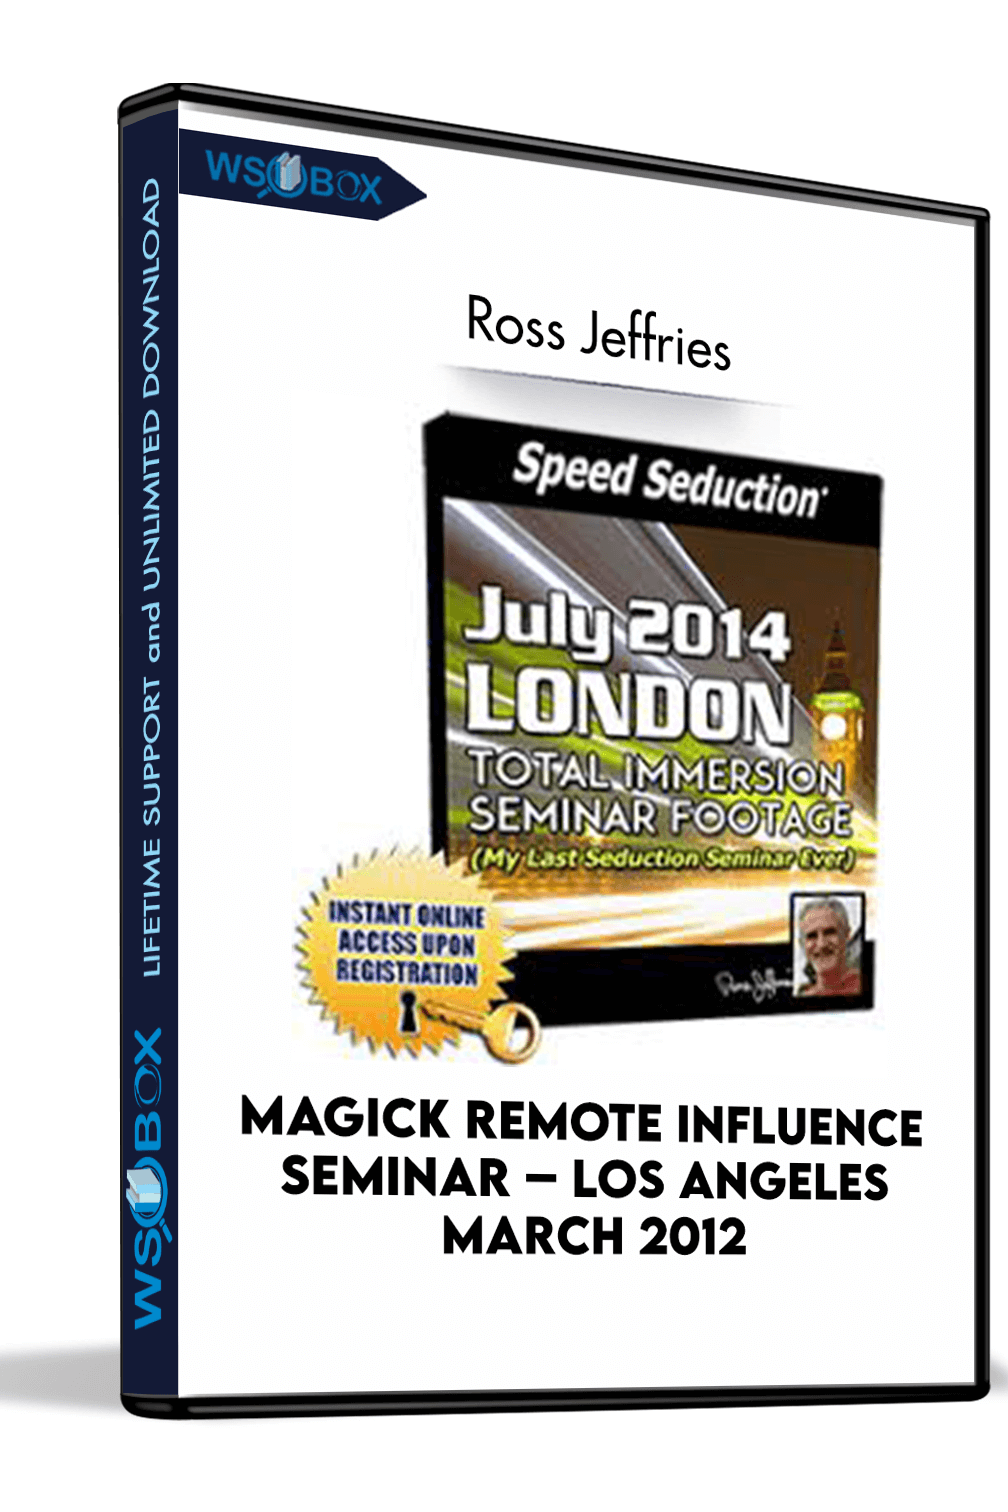 Magick Remote Influence Seminar – Los Angeles March 2012 – Ross Jeffries